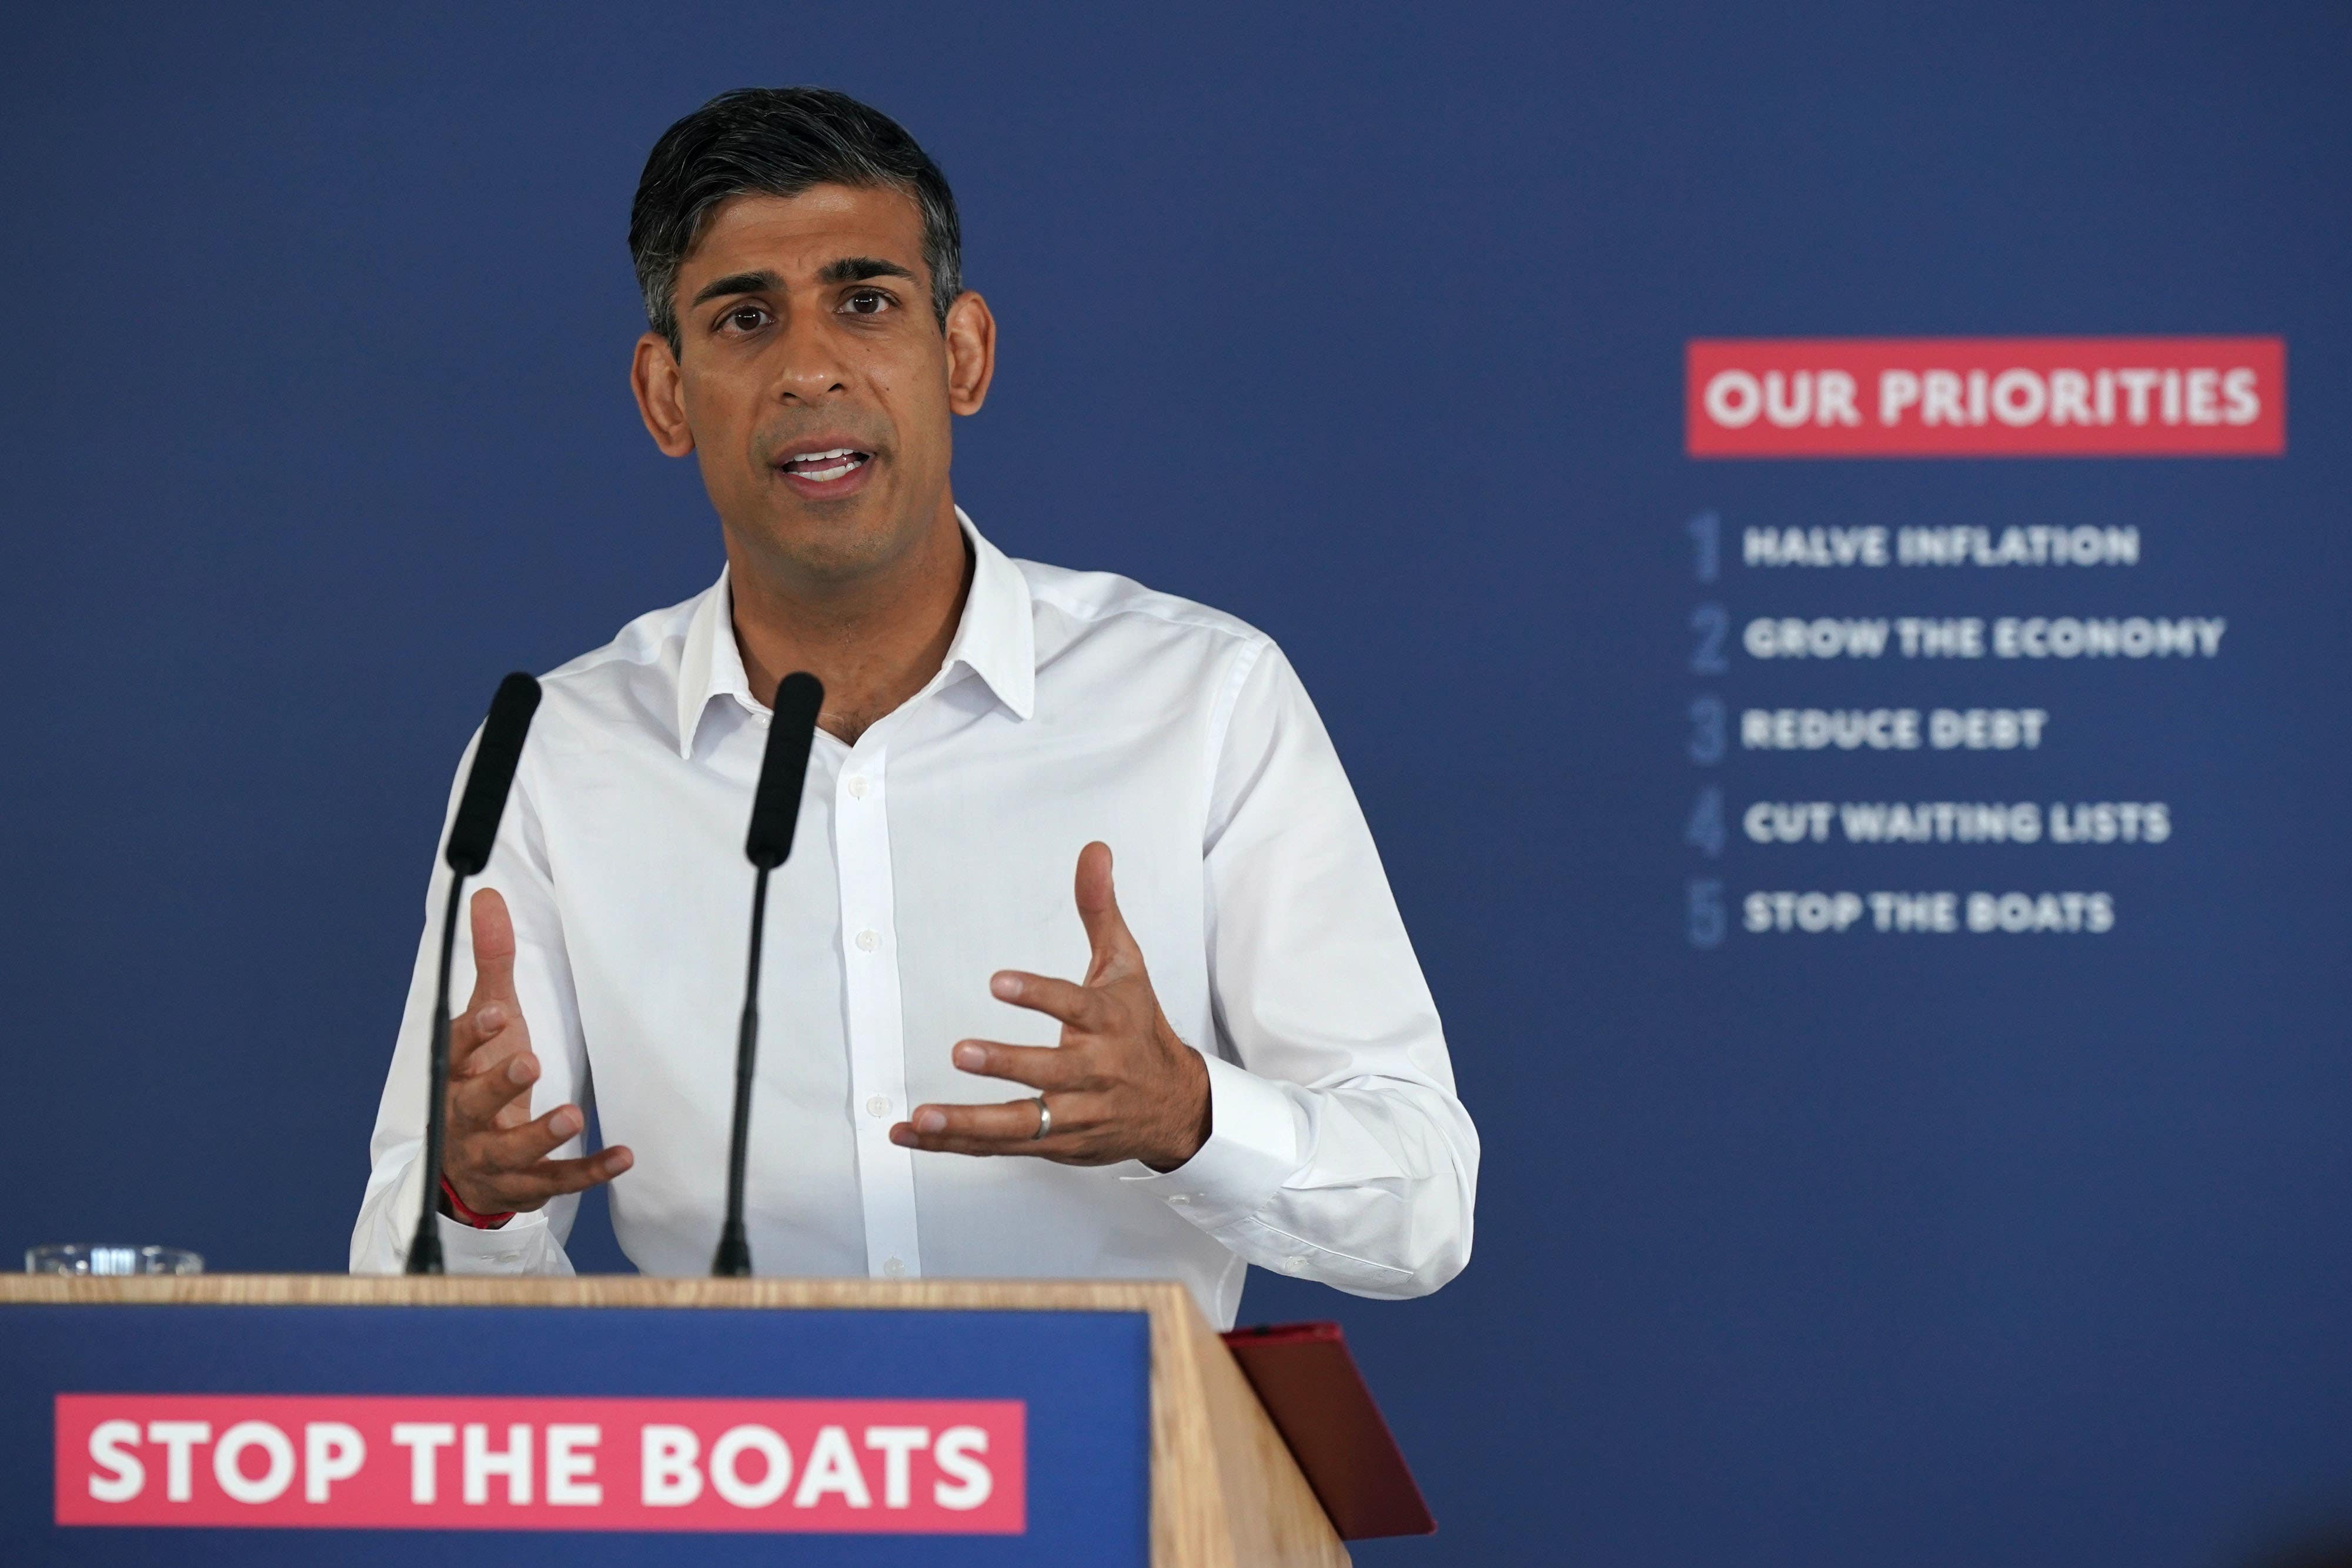 Sunak unveiled his five pledges in January this year